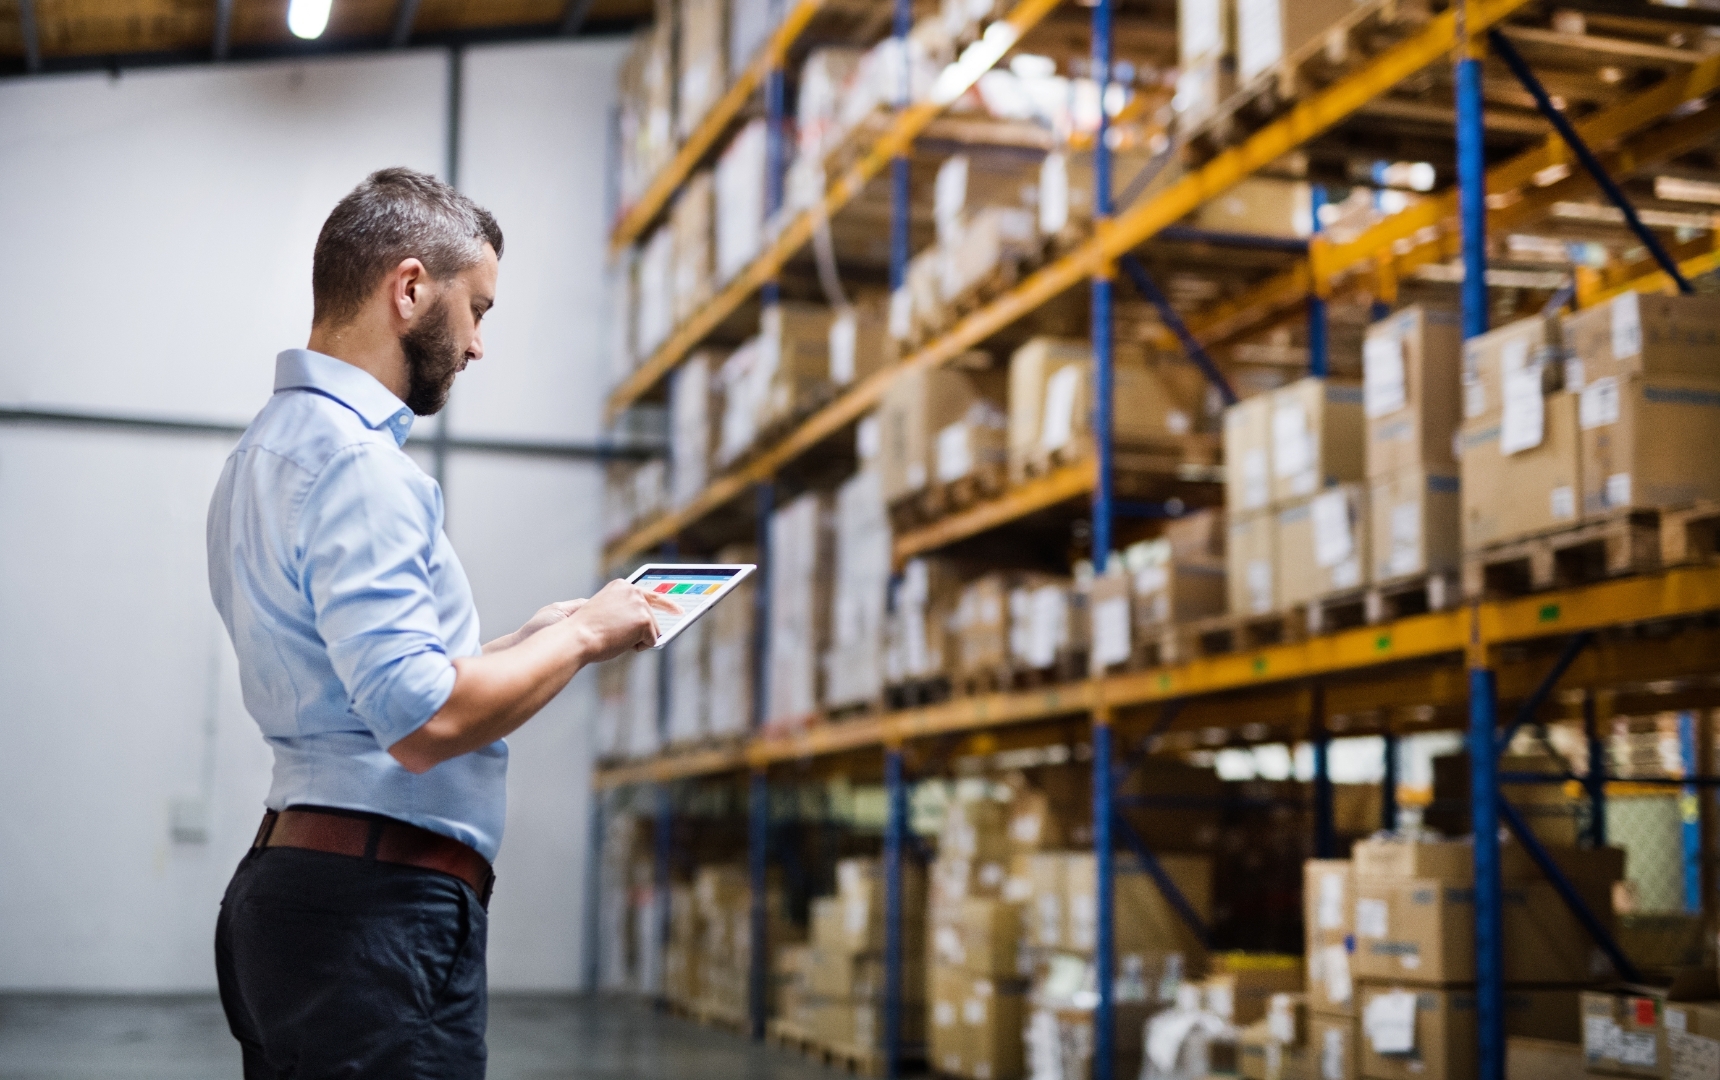 B2B Product Manager Surveying Stock in Distribution Warehouse